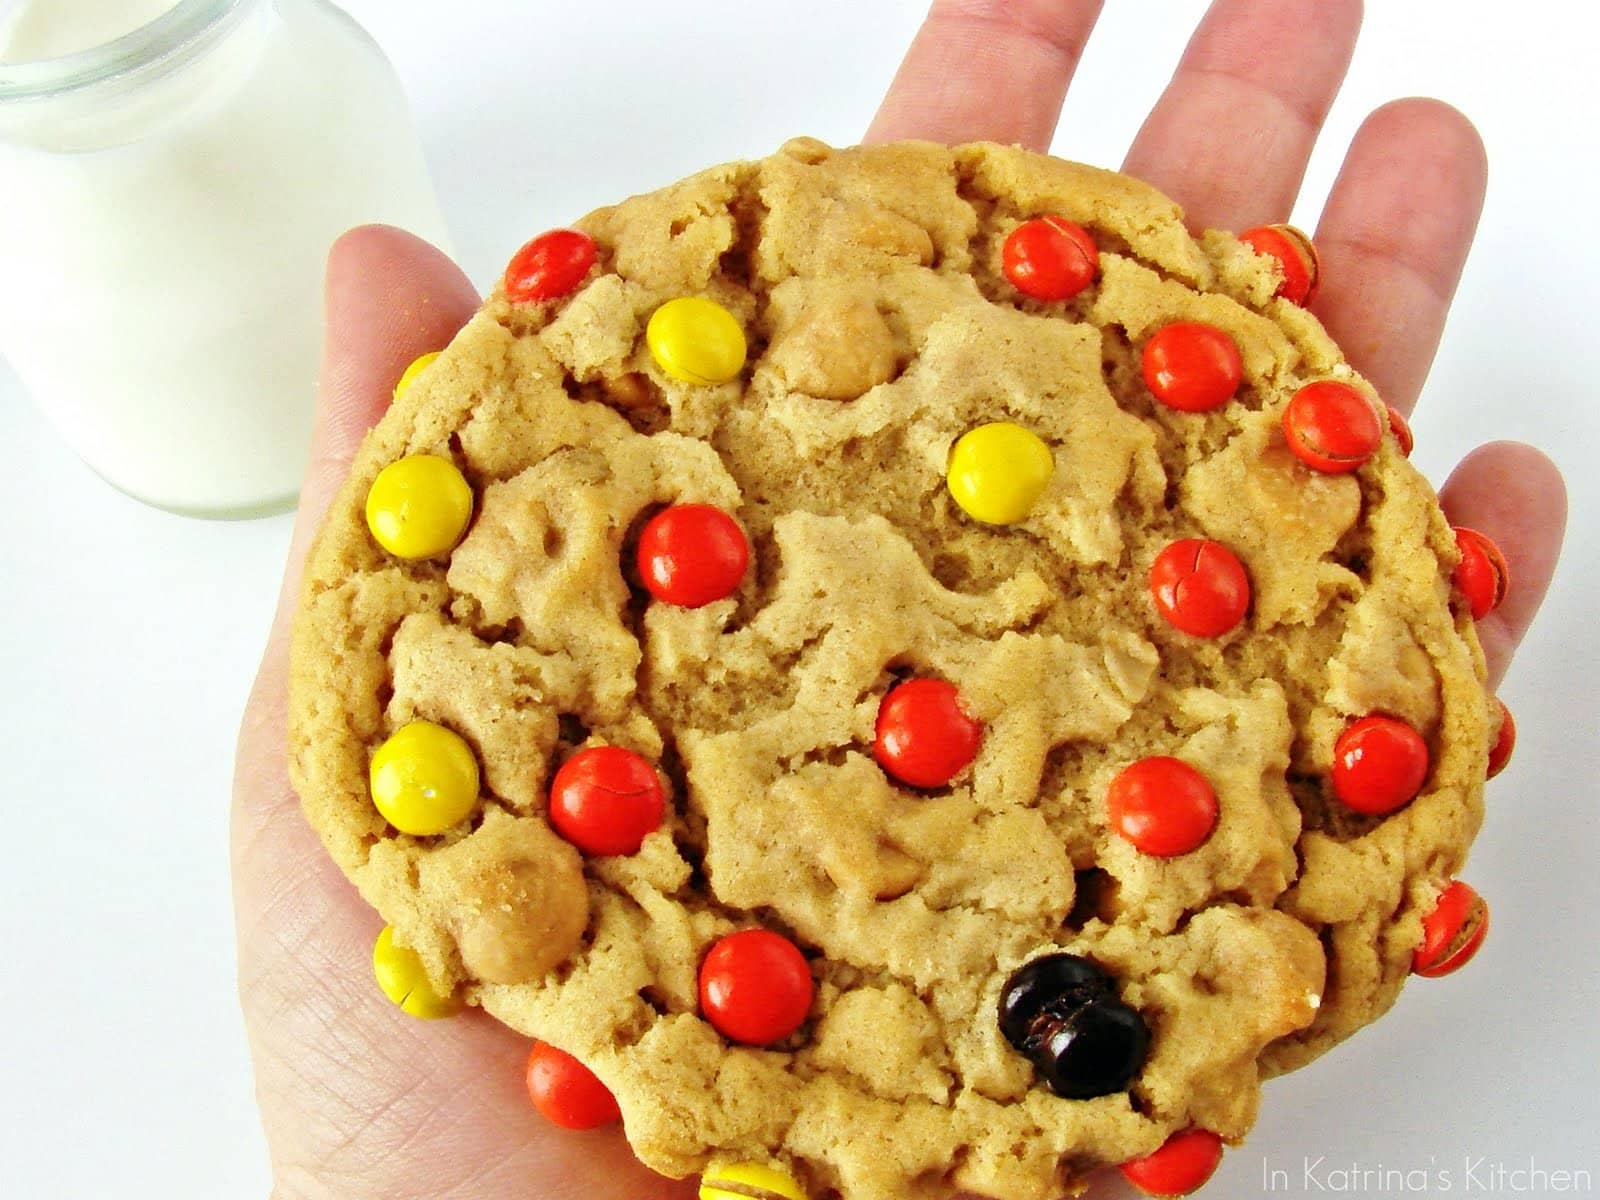 16 Reese's Pieces Candy Desserts That Will Mesmerize You!